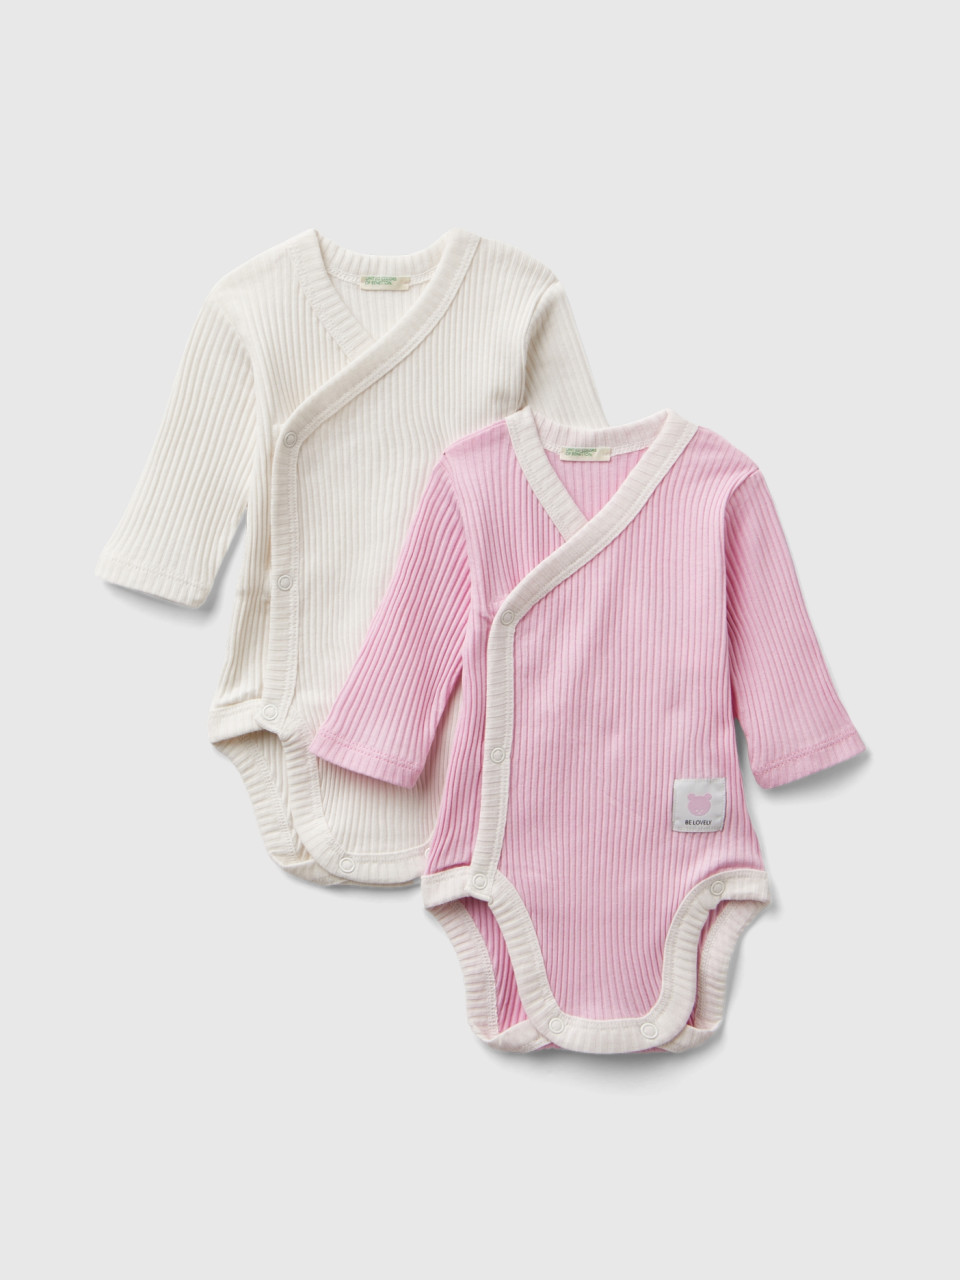 Benetton, Two Long Sleeve Ribbed Knit Bodysuits, Pink, Kids